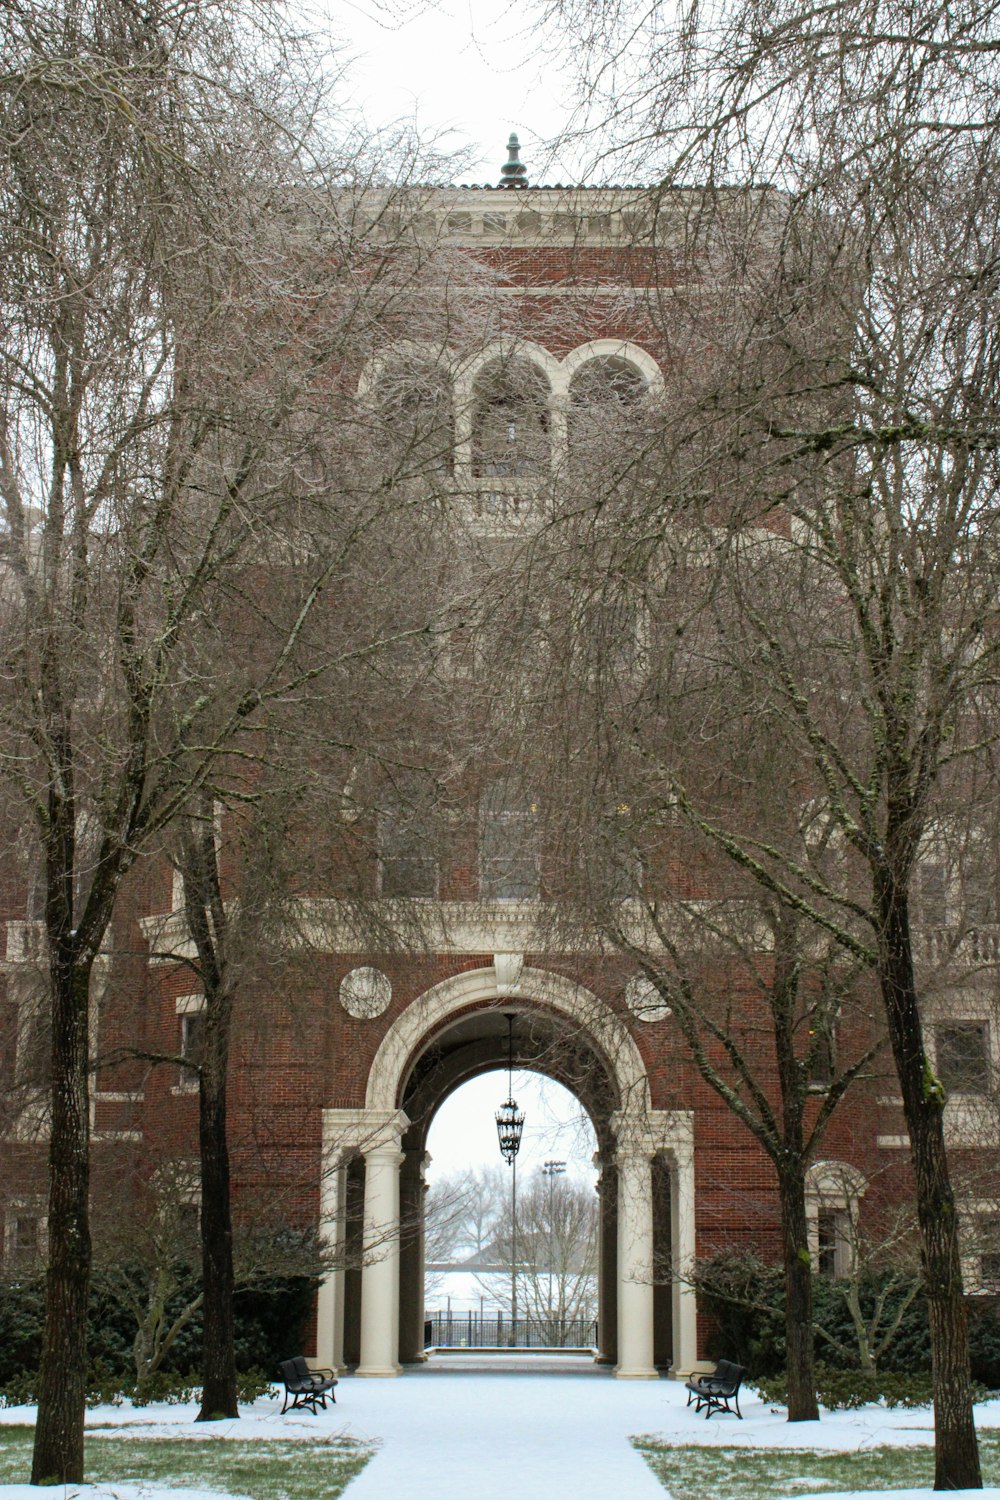 a large brick building with a clock tower in the middle of it